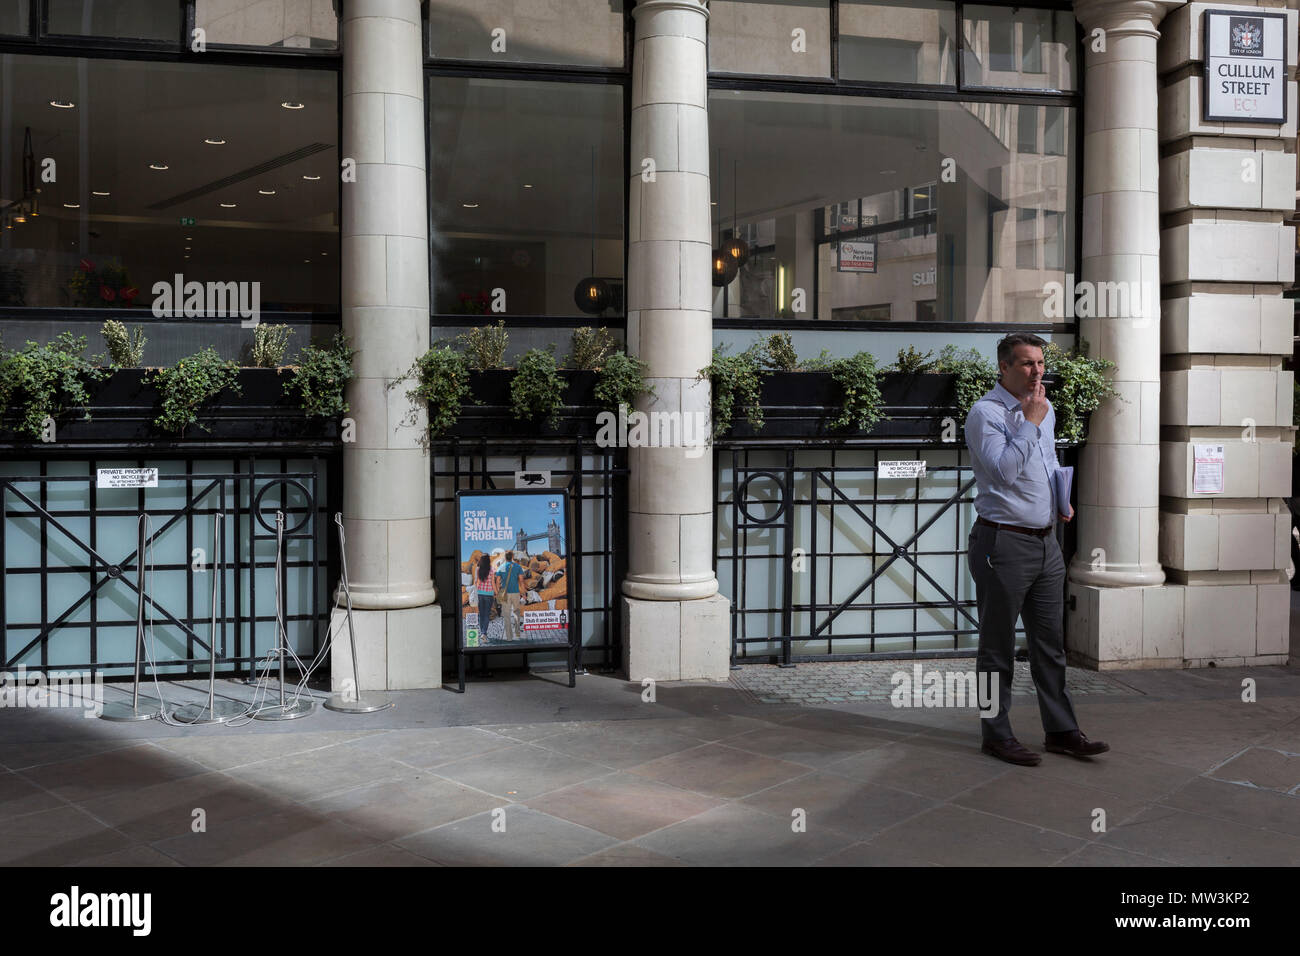 A businessman takes a cigarette break next to a sign explaining the problem of dropped cigarette butts in the City of London, the capital's financial district aka the Square Mile, on 17th May 2018, in London, UK. Stock Photo